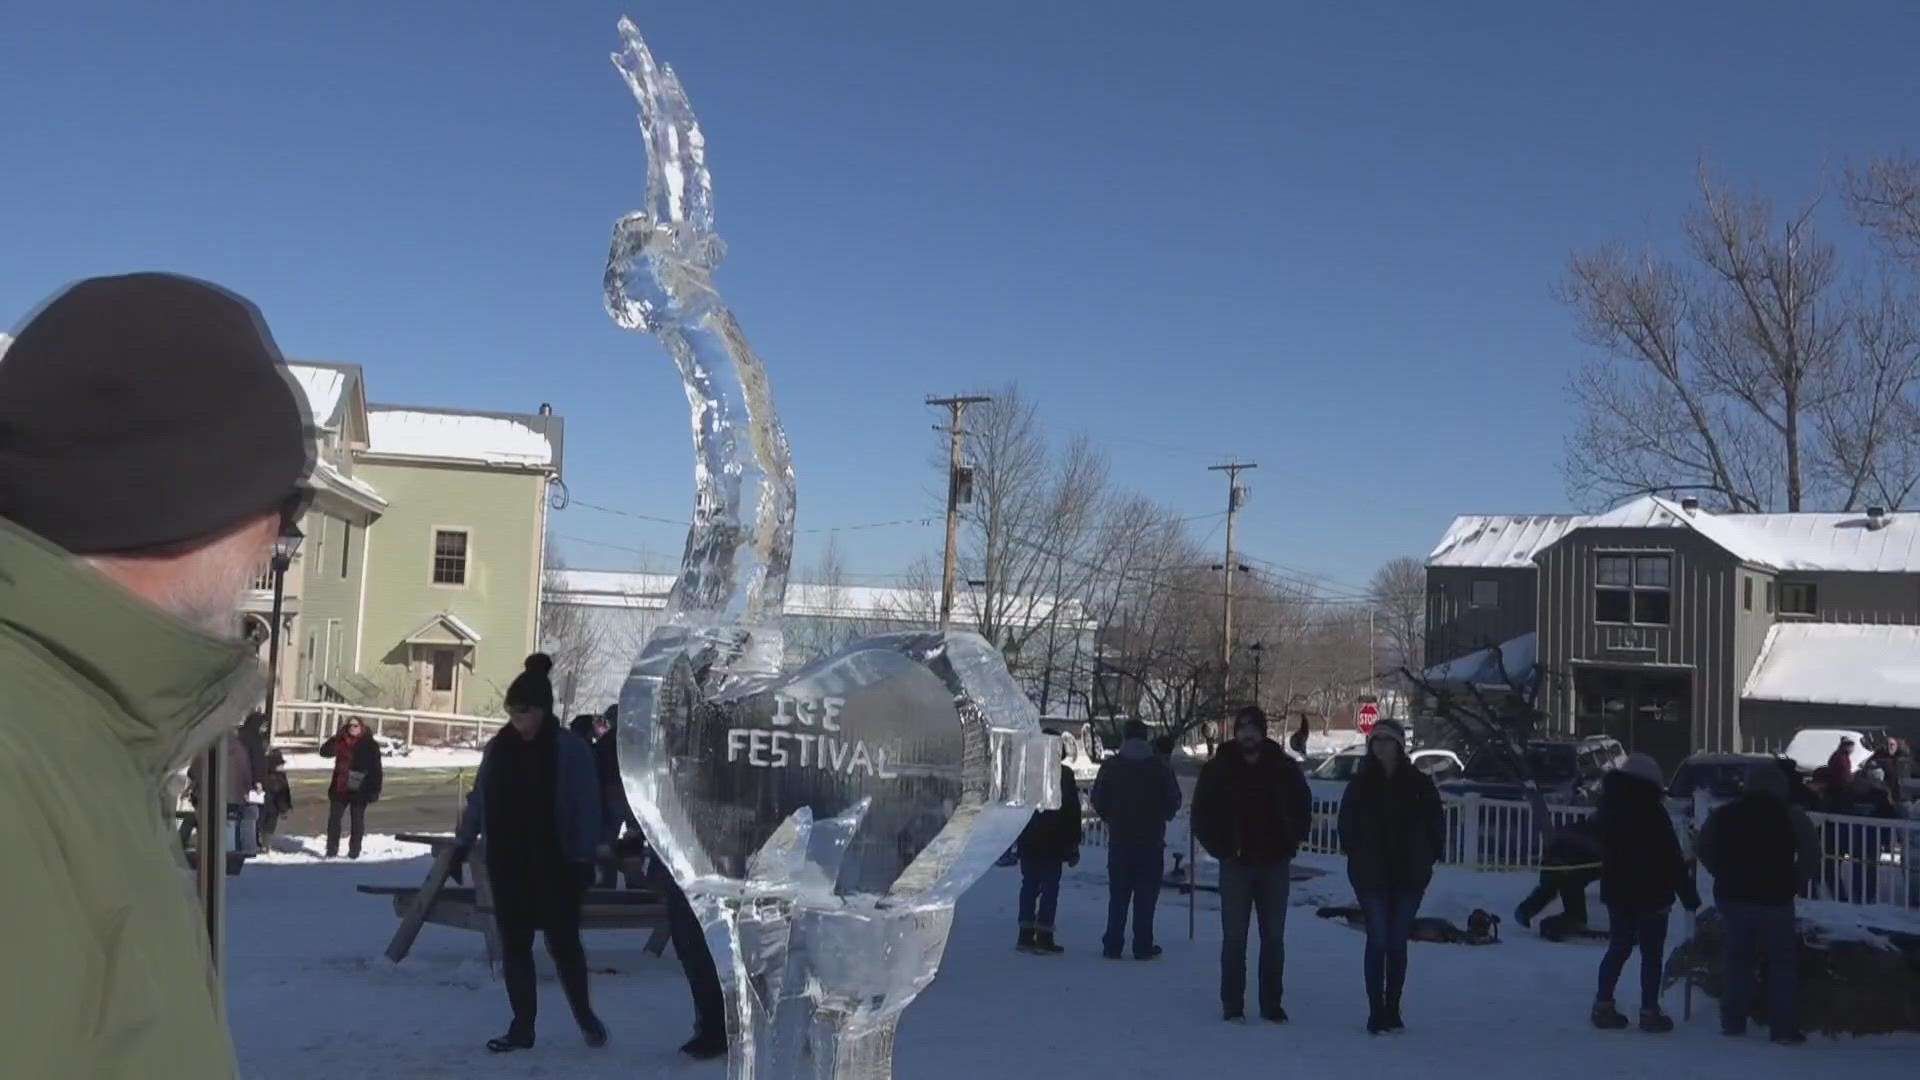 You'll find ice sculptures, ice bars, ice rowing, horse-drawn carriage rides, live music and more during the three-day festival, which kicks off Friday, Feb. 24.